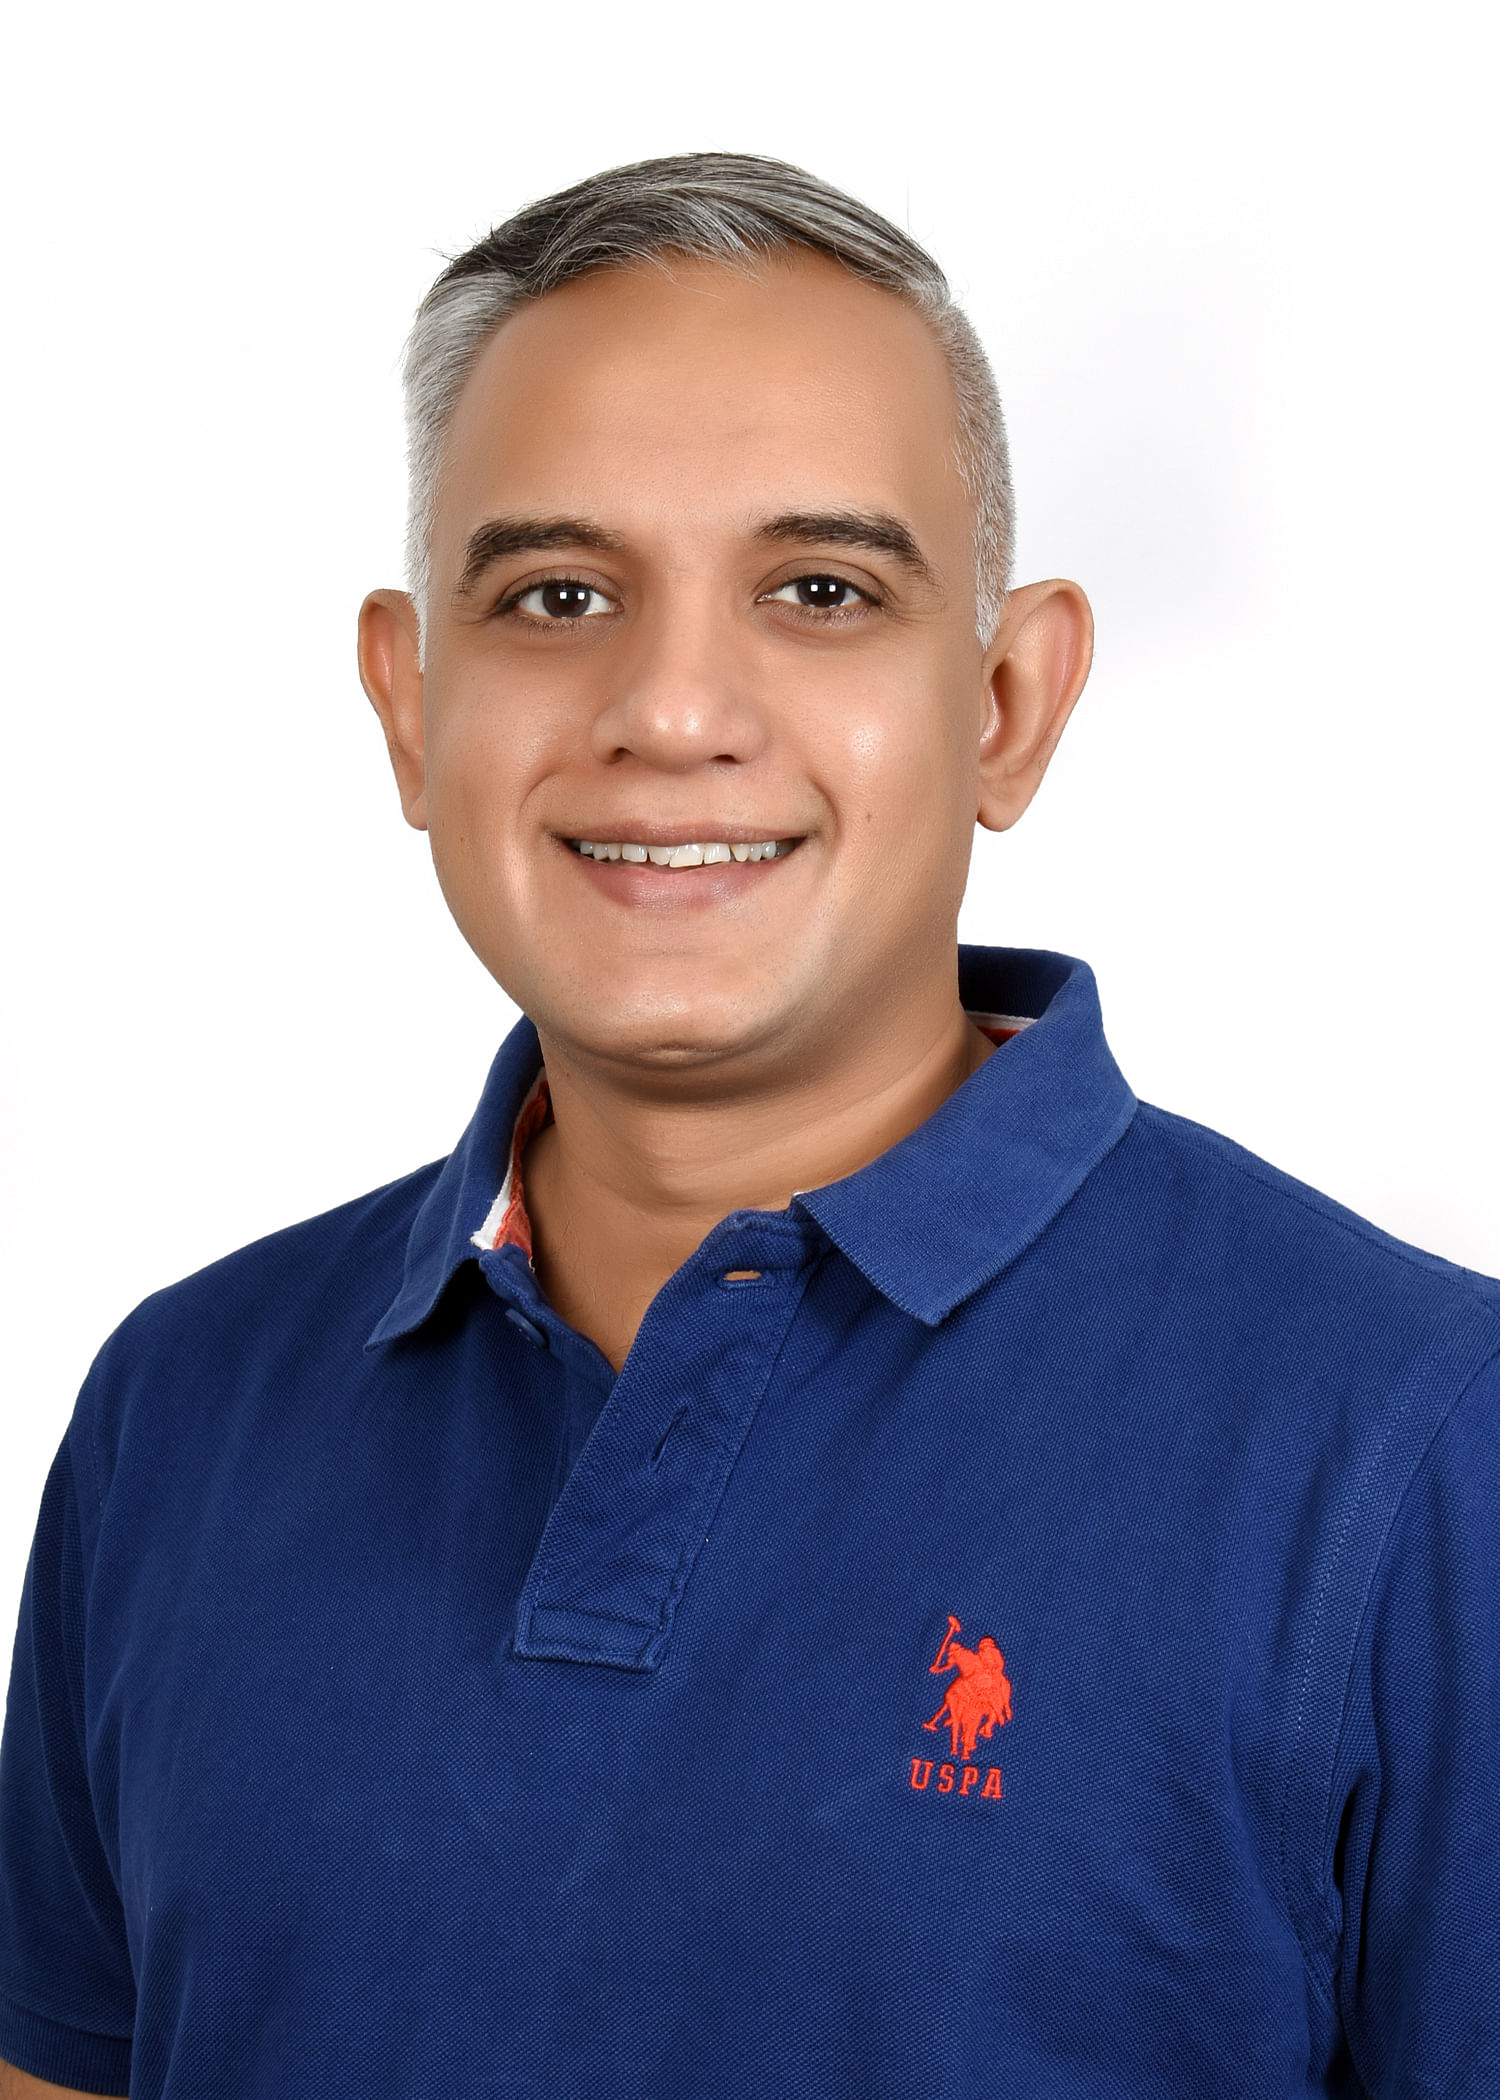 NV Subramanian, Founder and CEO, Payed